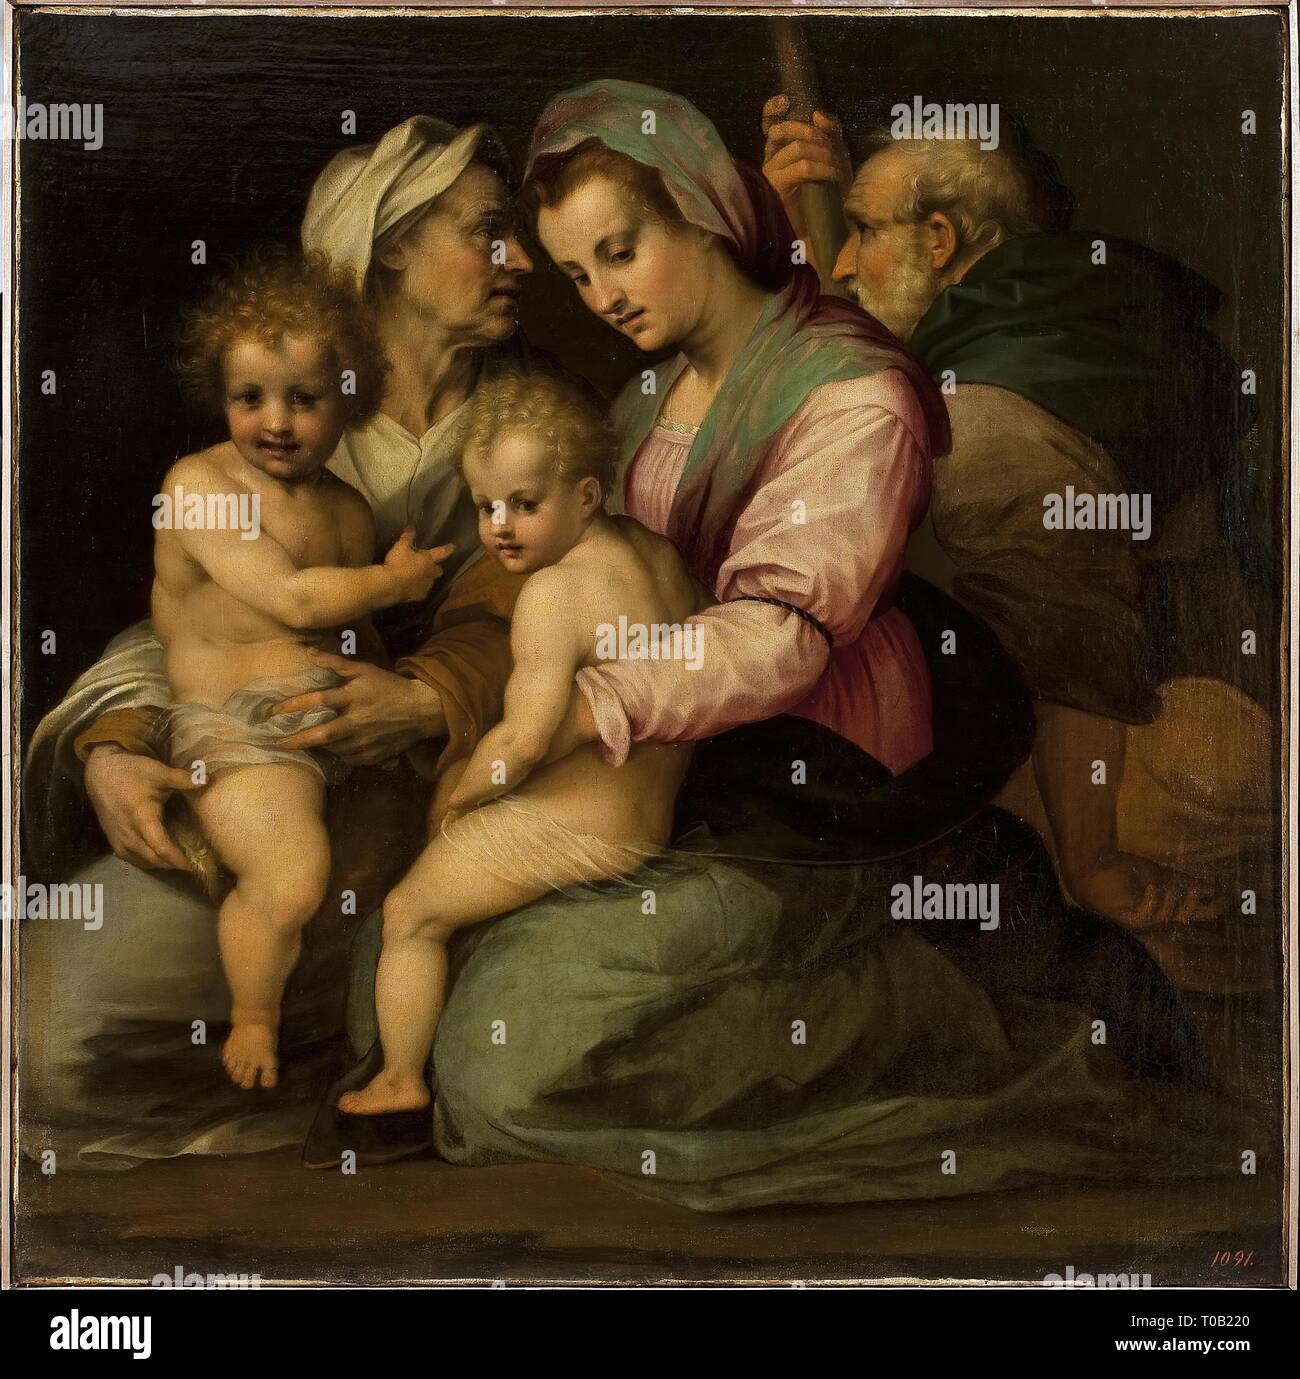 'Holy Family with St Elizabeth and St John the Baptist (copy)'. Italy, 16th century. Dimensions: 94x93 cm. Museum: State Hermitage, St. Petersburg. Author: Andrea del Sarto (Andrea d'Agnolo). ANDREA DEL SARTO. Stock Photo